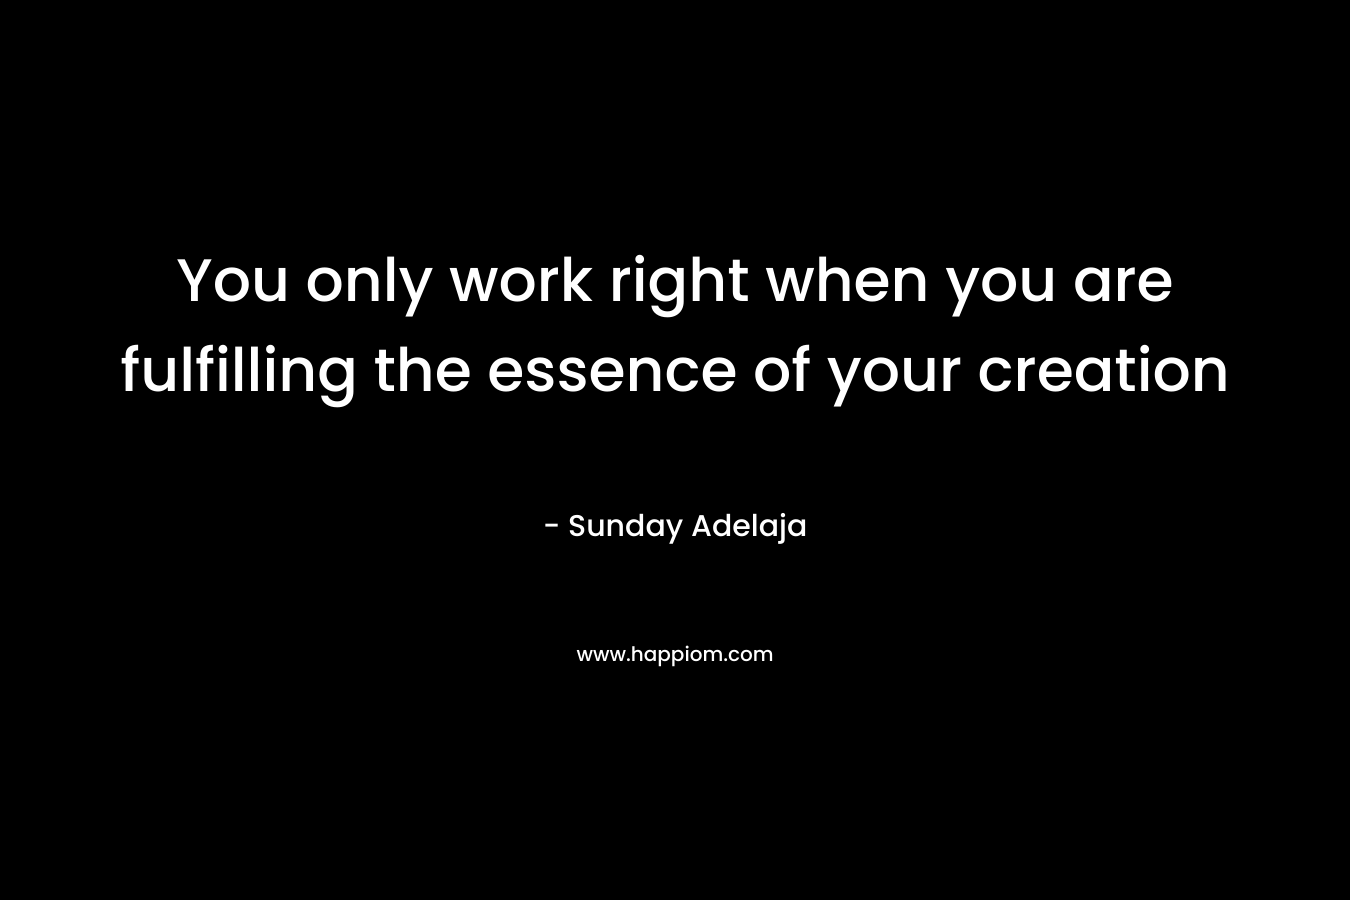 You only work right when you are fulfilling the essence of your creation